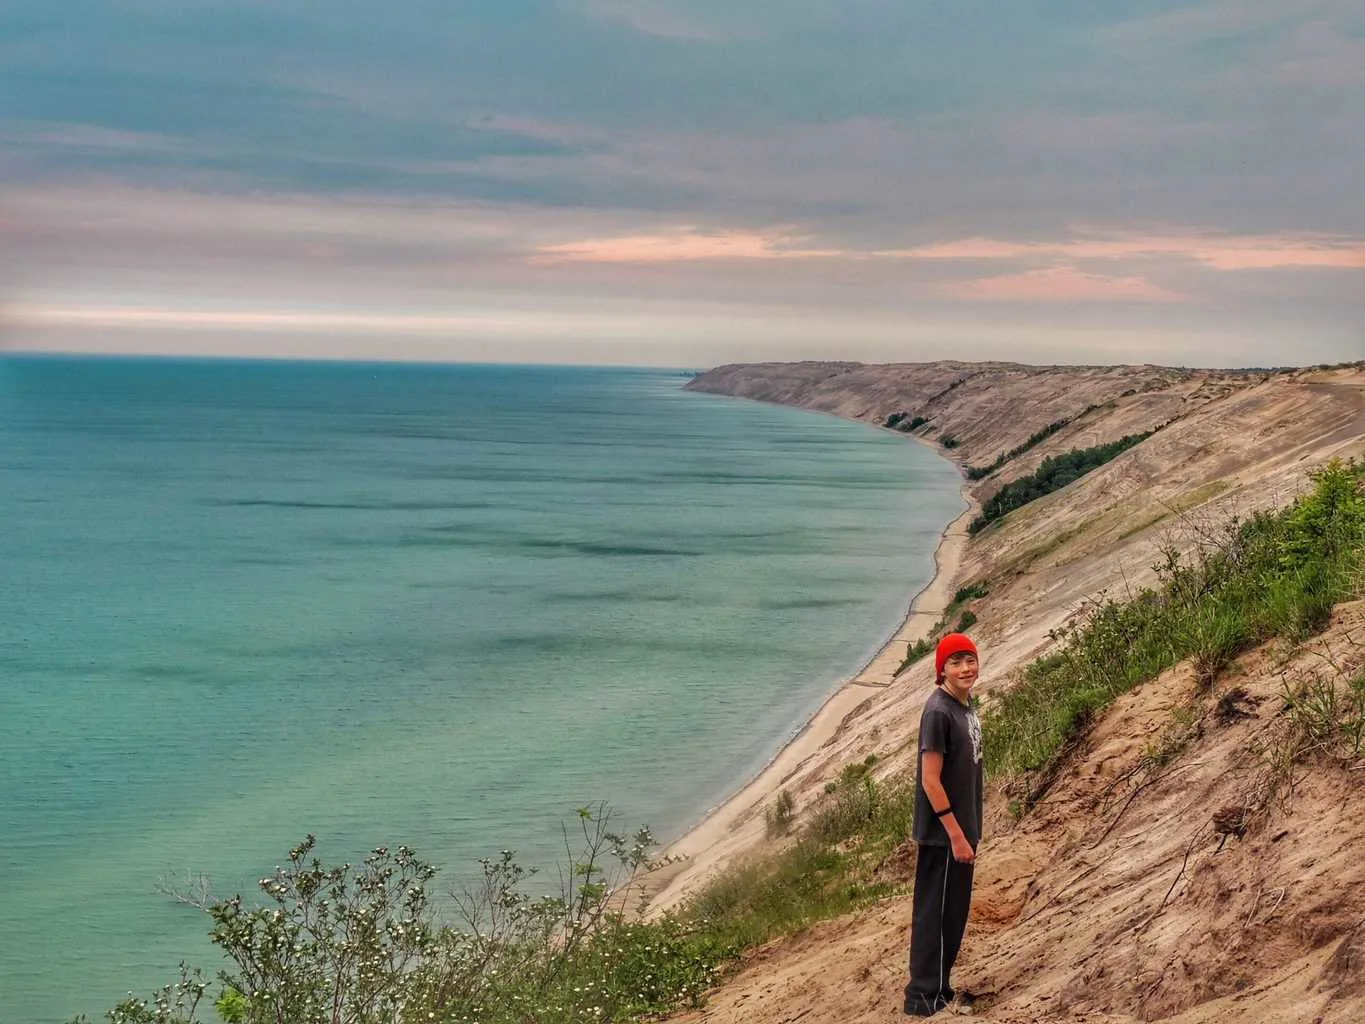 A boy stands on the edge of a sand dune in Pictured Rocks National Lakeshore.